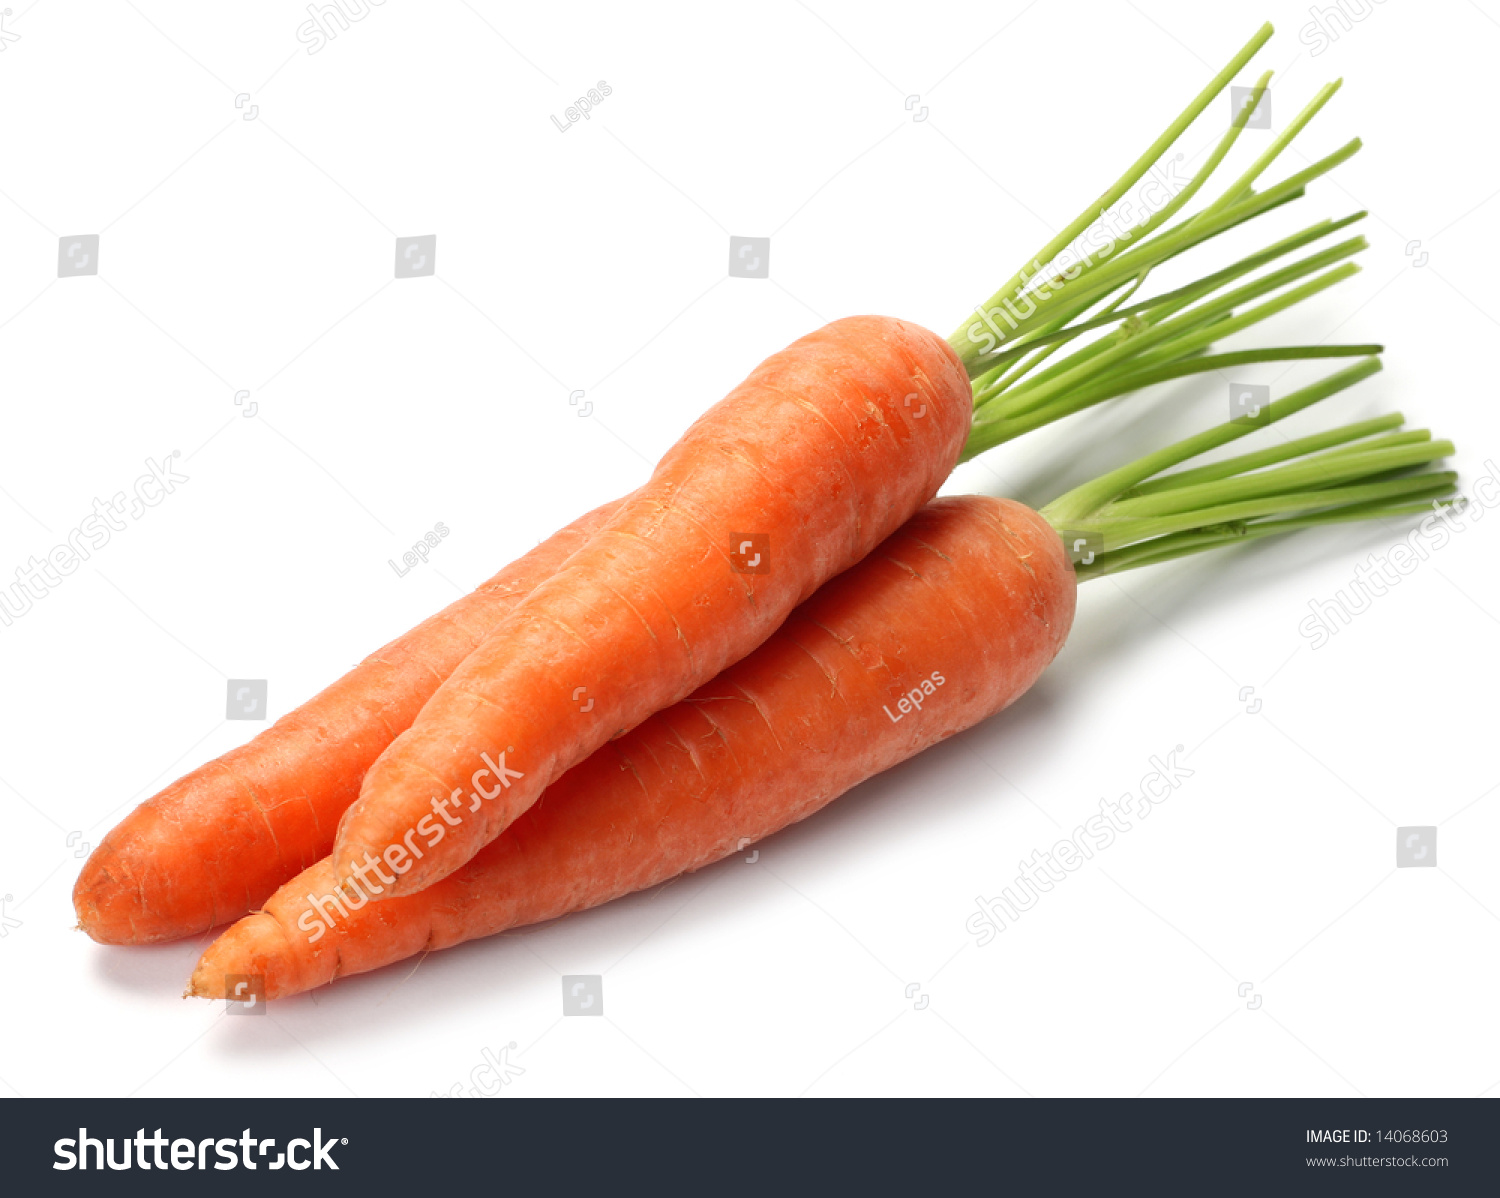 Carrot Group 62